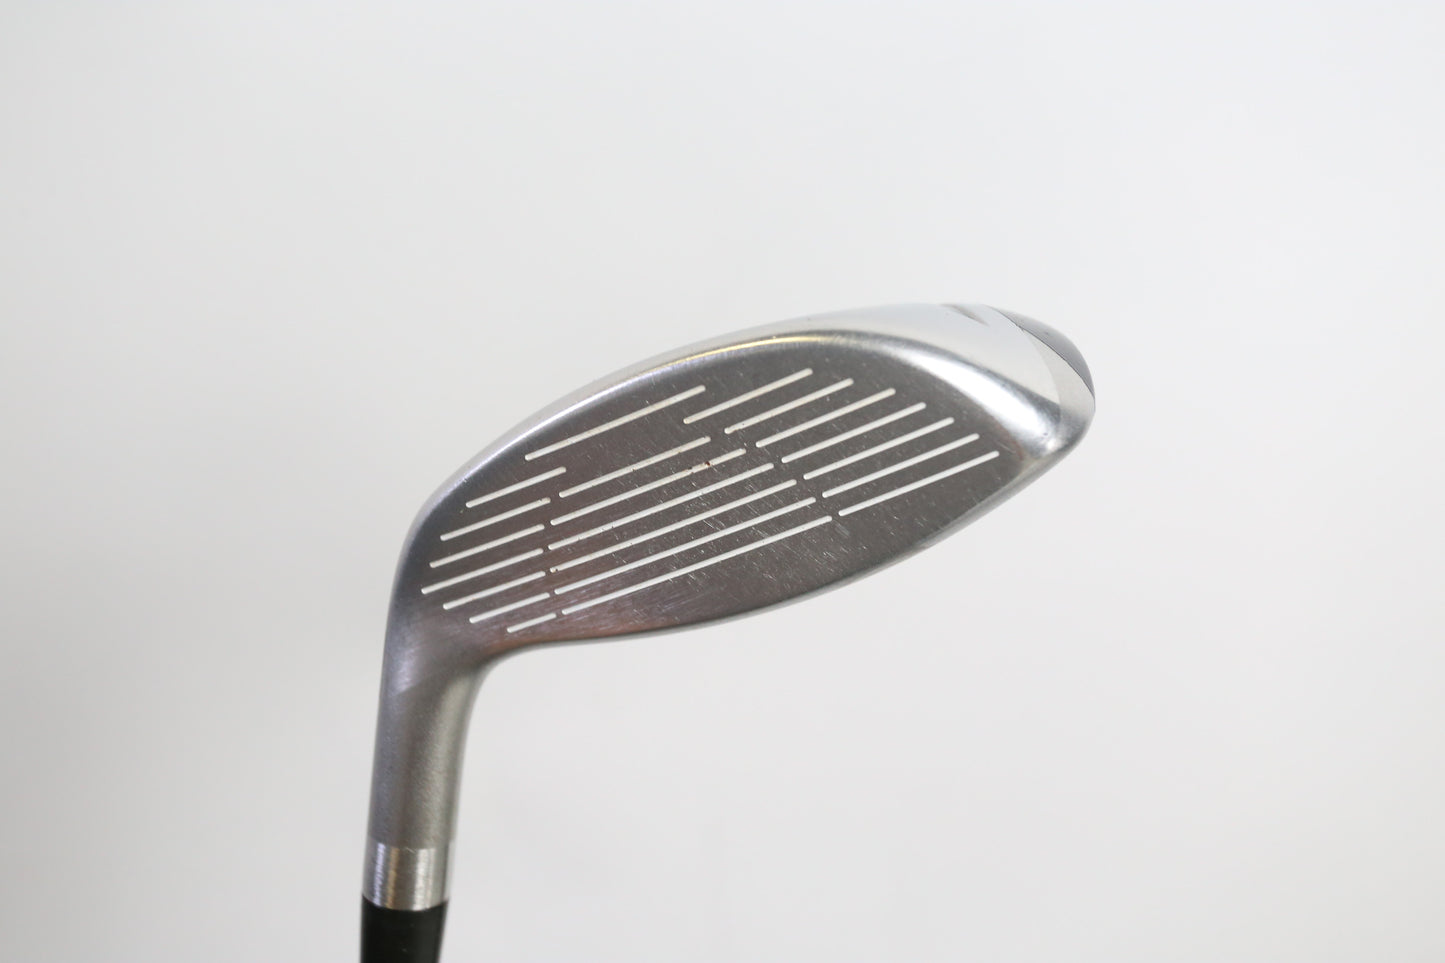 Used Ping G10 3H Hybrid - Right-Handed - 21 Degrees - Stiff Flex